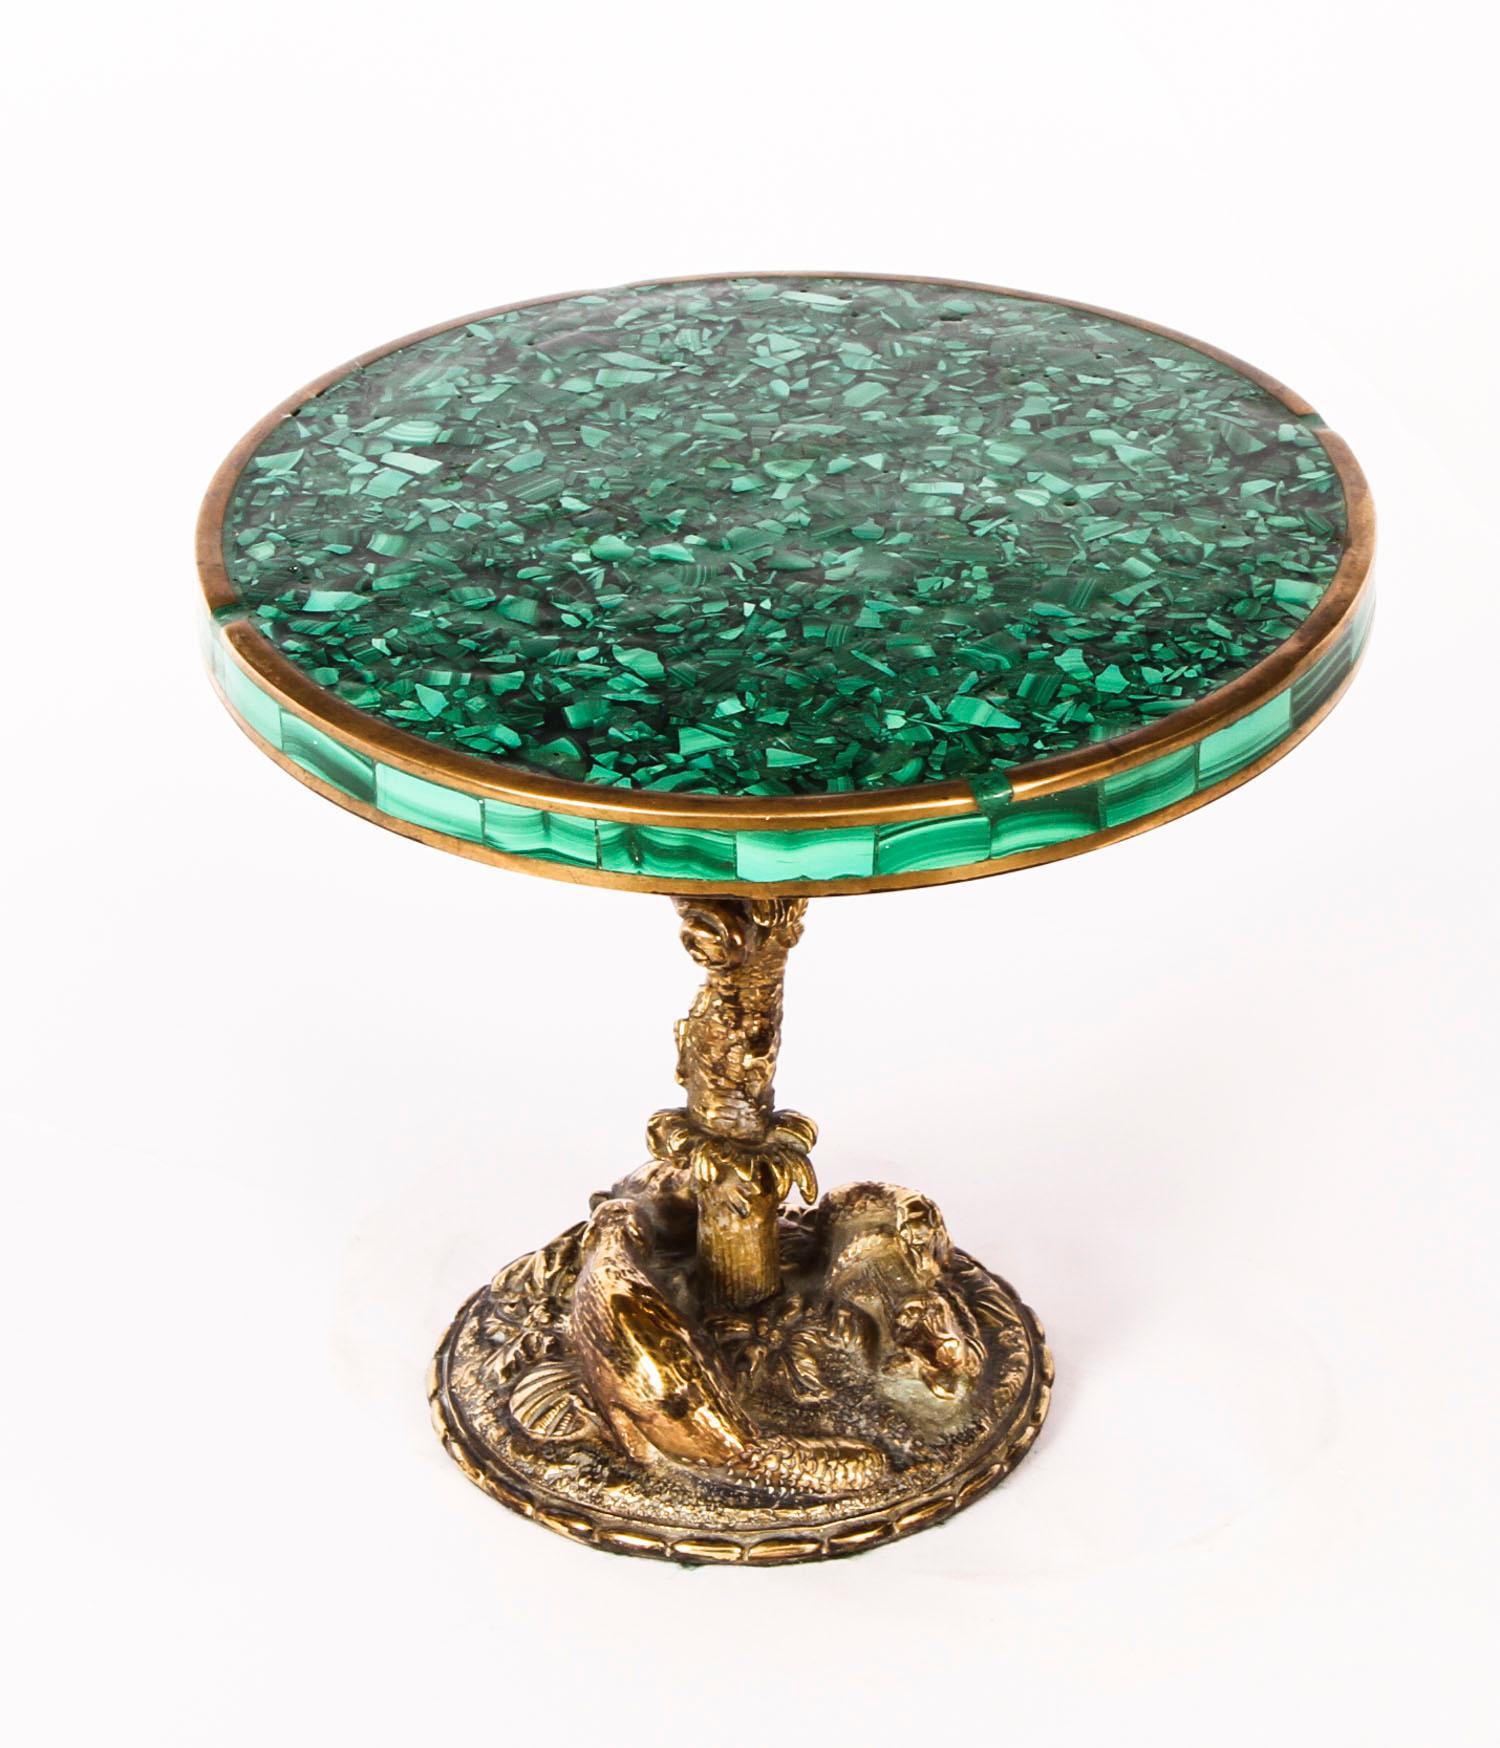 Antique French Ormolu and Malachite Miniature Table, 19th Century 8